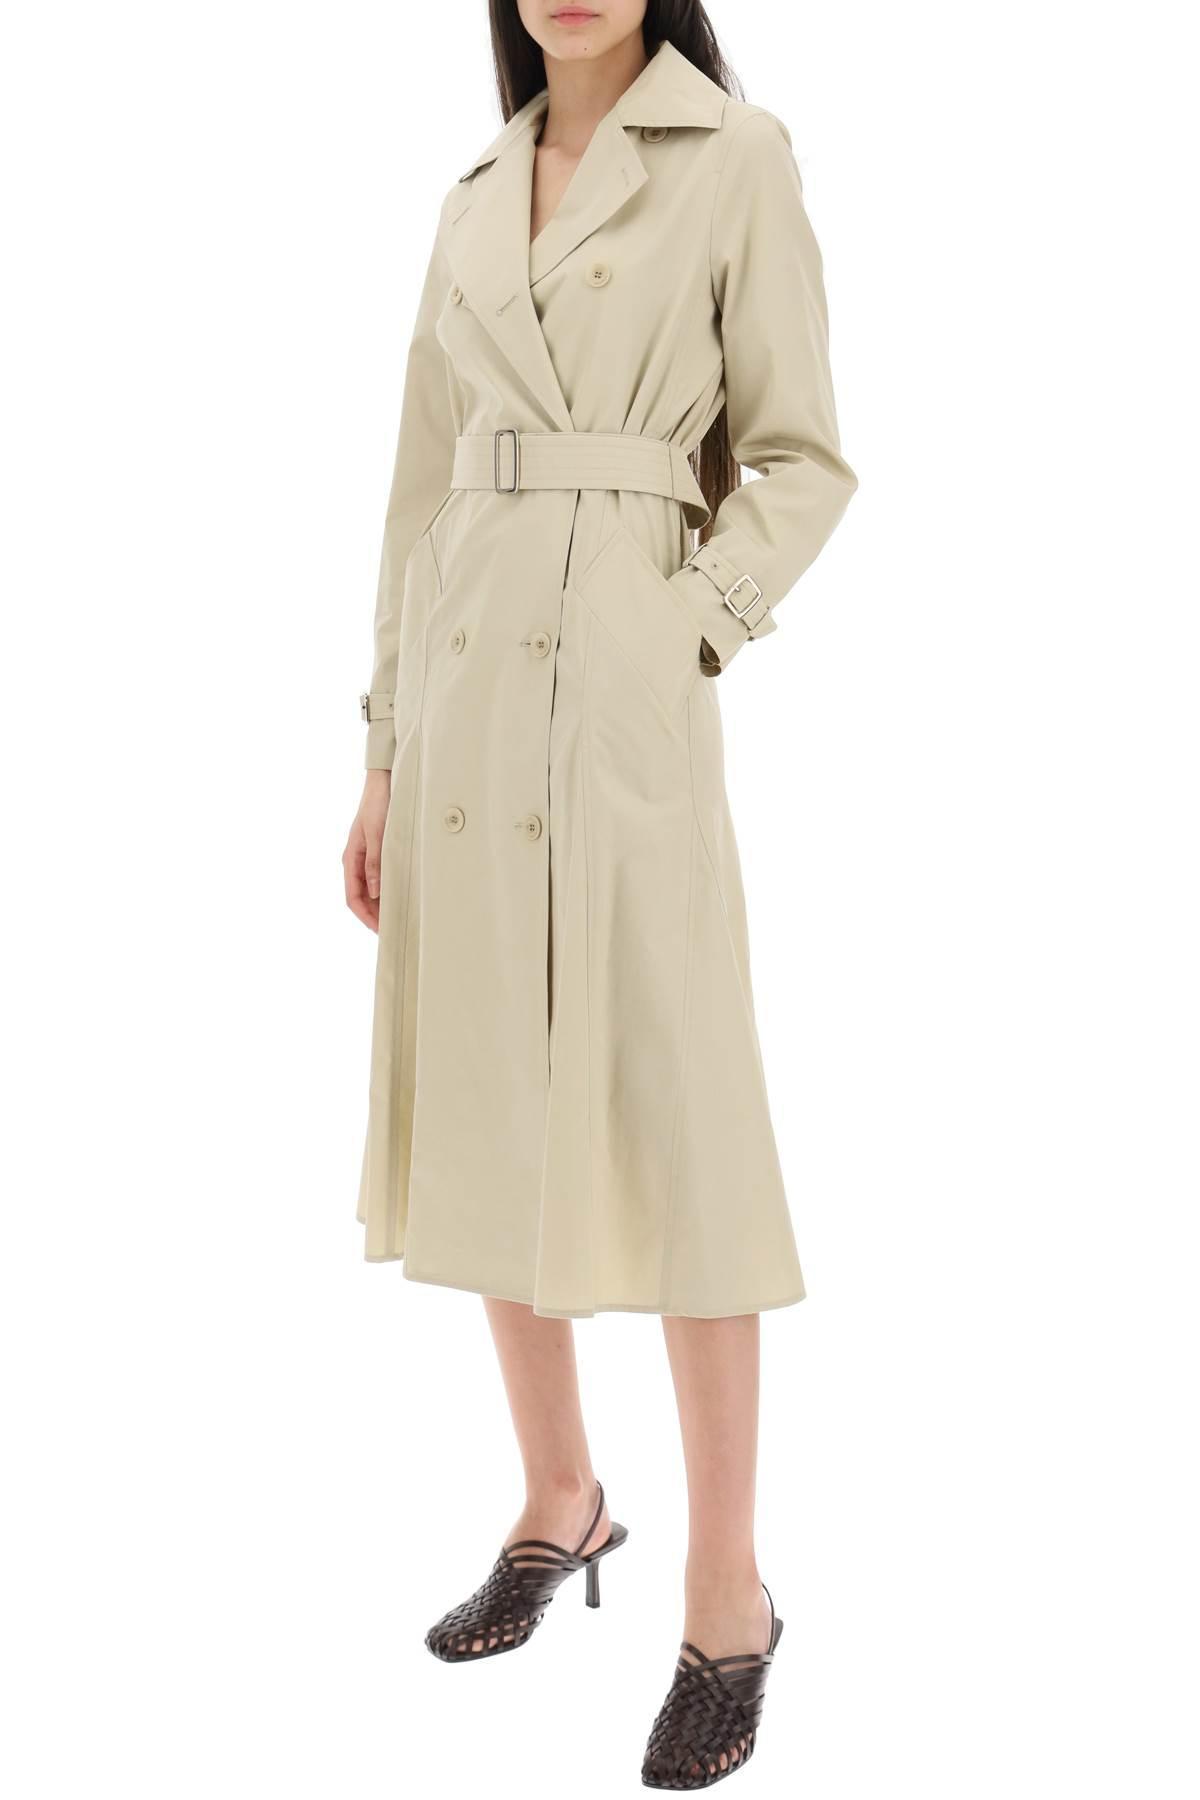 Max Mara 'fronda' Double-breasted Cotton Trench Coat in Natural | Lyst